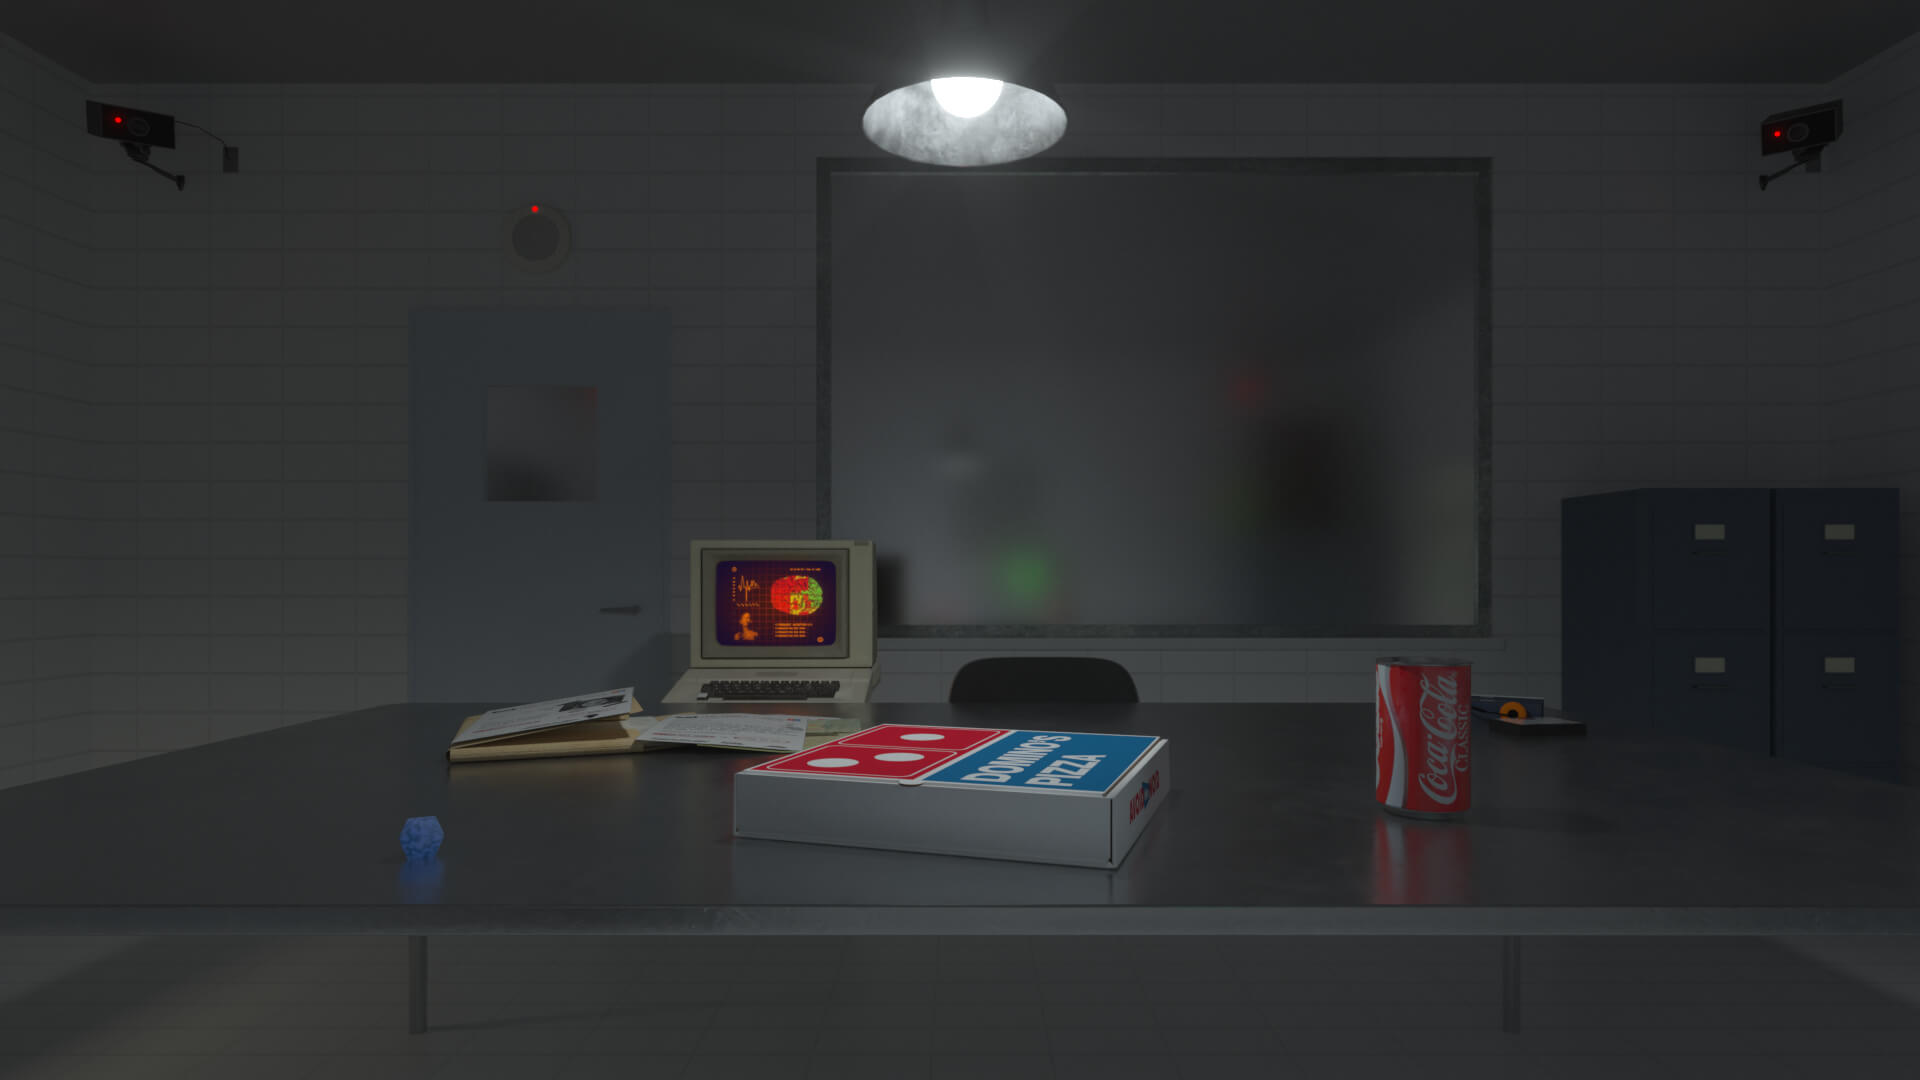 Hawkins National Laboratory observation room scene featuring a variety of props including a 1980s Domino's pizza box, 20 sided die, 1980s Coke can, 1980s computer monitor and a folder of papers on a metal desk.